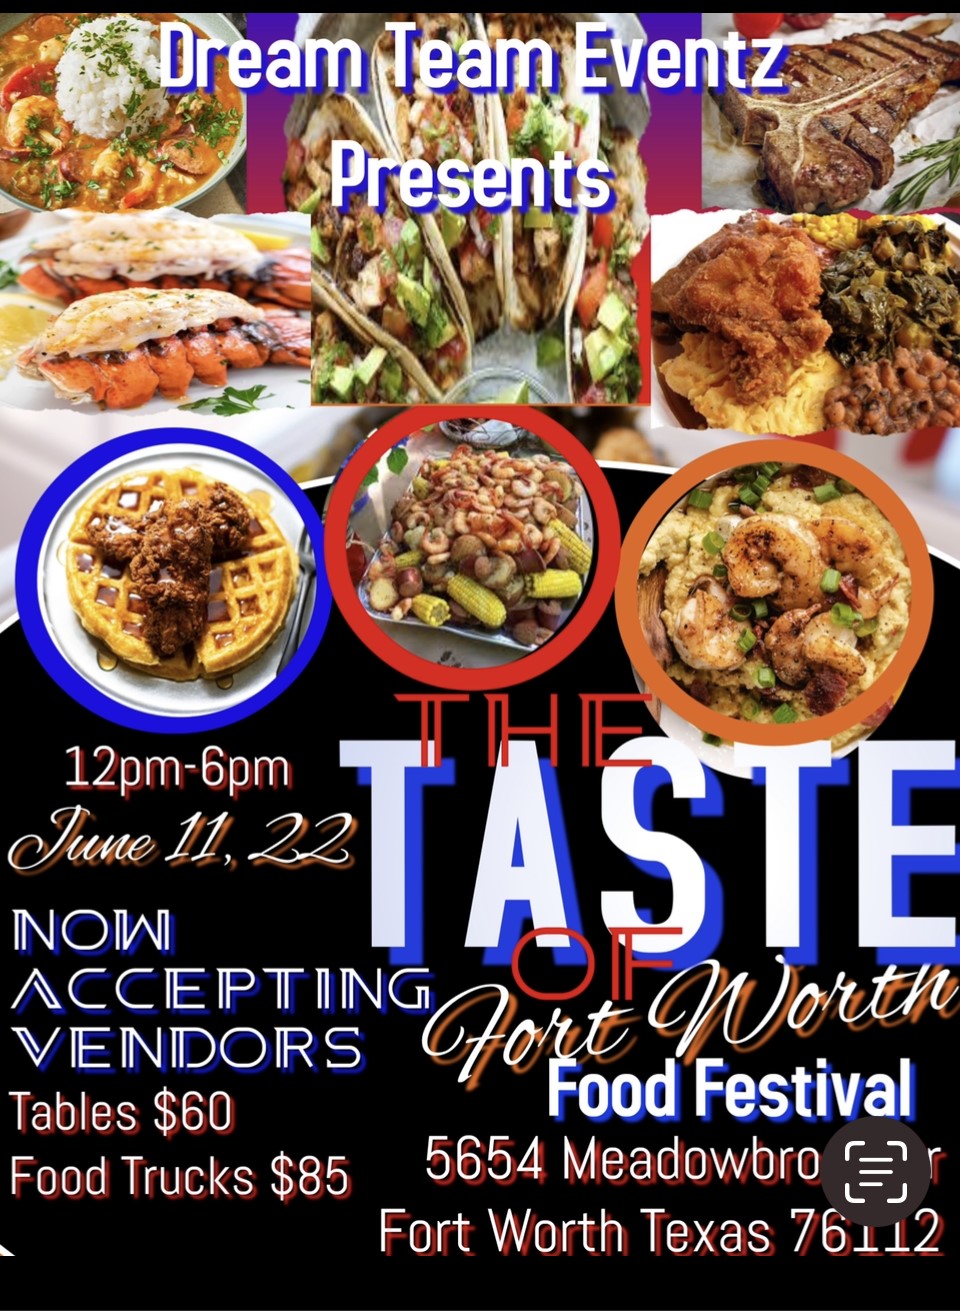 The Taste of Fort Worth Food Festival on Jun 11, 12:00@Xclusive Event Center - Buy tickets and Get information on Dream Team Events 